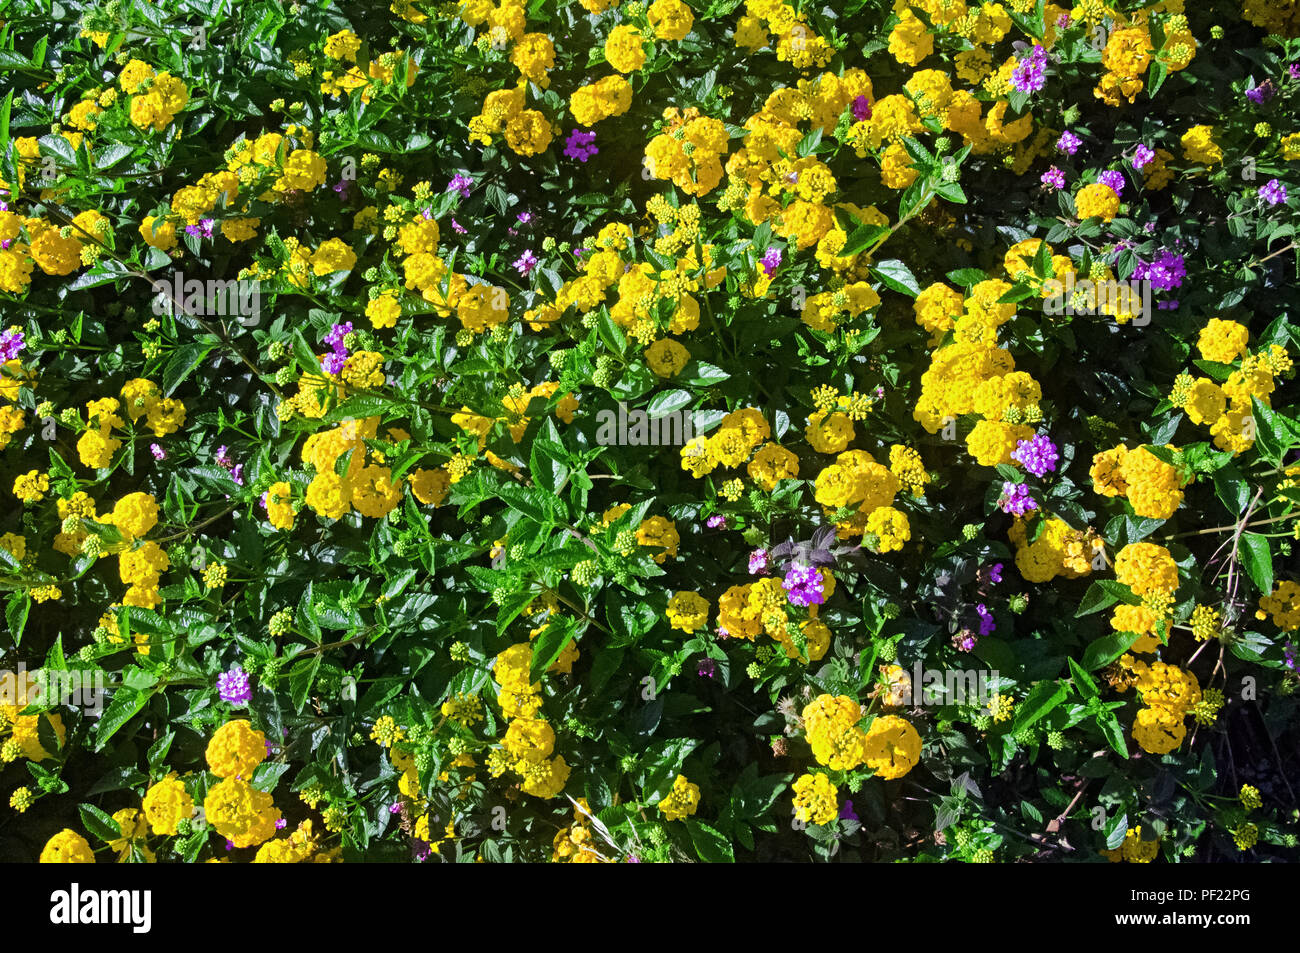 Bush of yellow and violet flowers Stock Photo